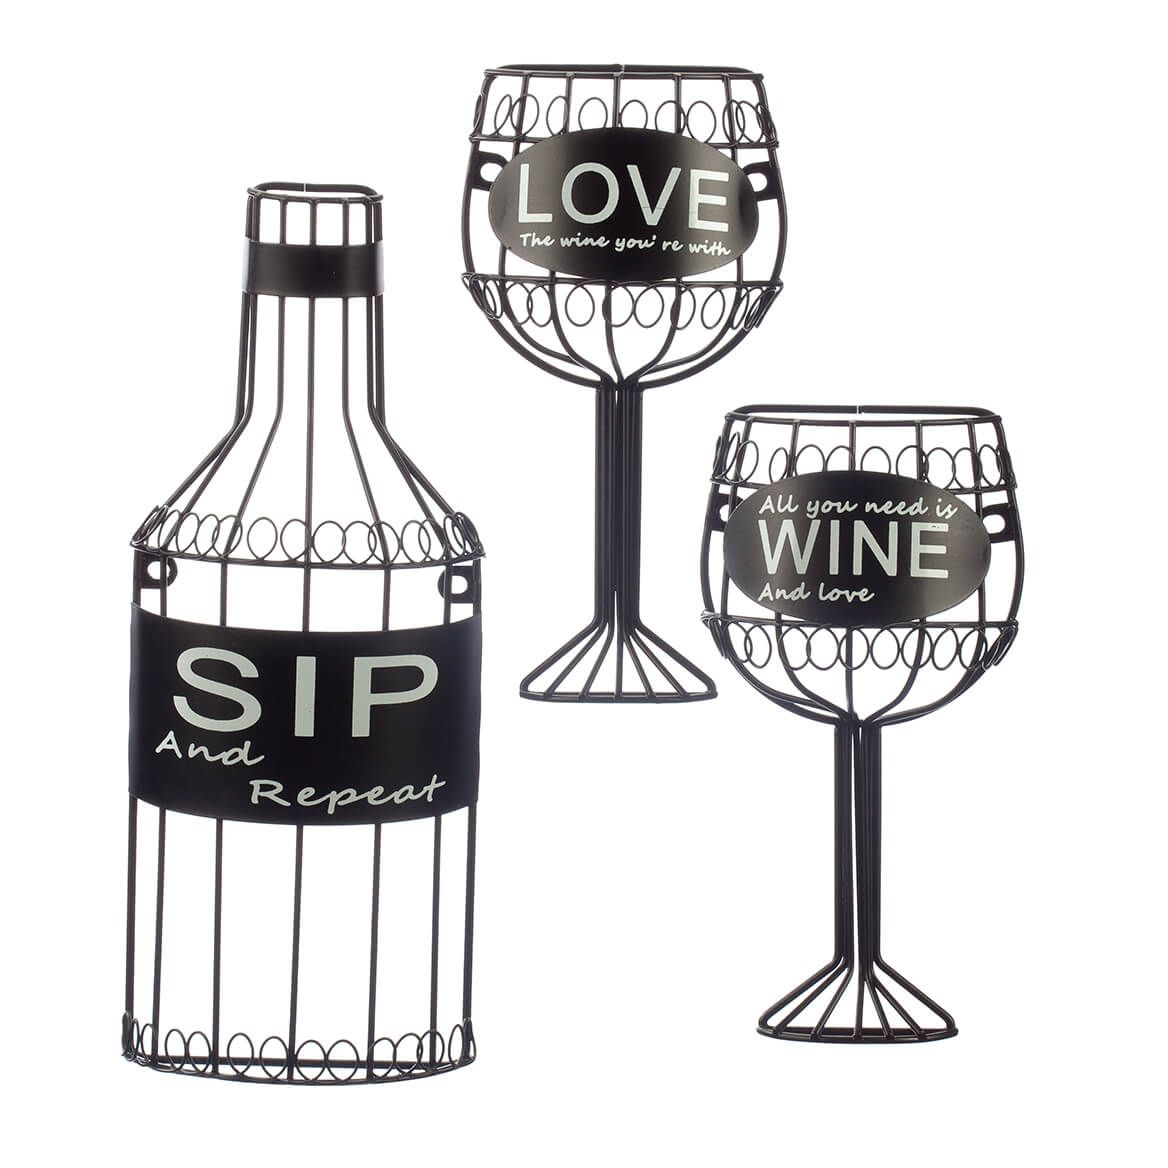 3 Piece Sip,Wine &Love Wall Hanging Set by HomeStyle Kitchen + '-' + 365647